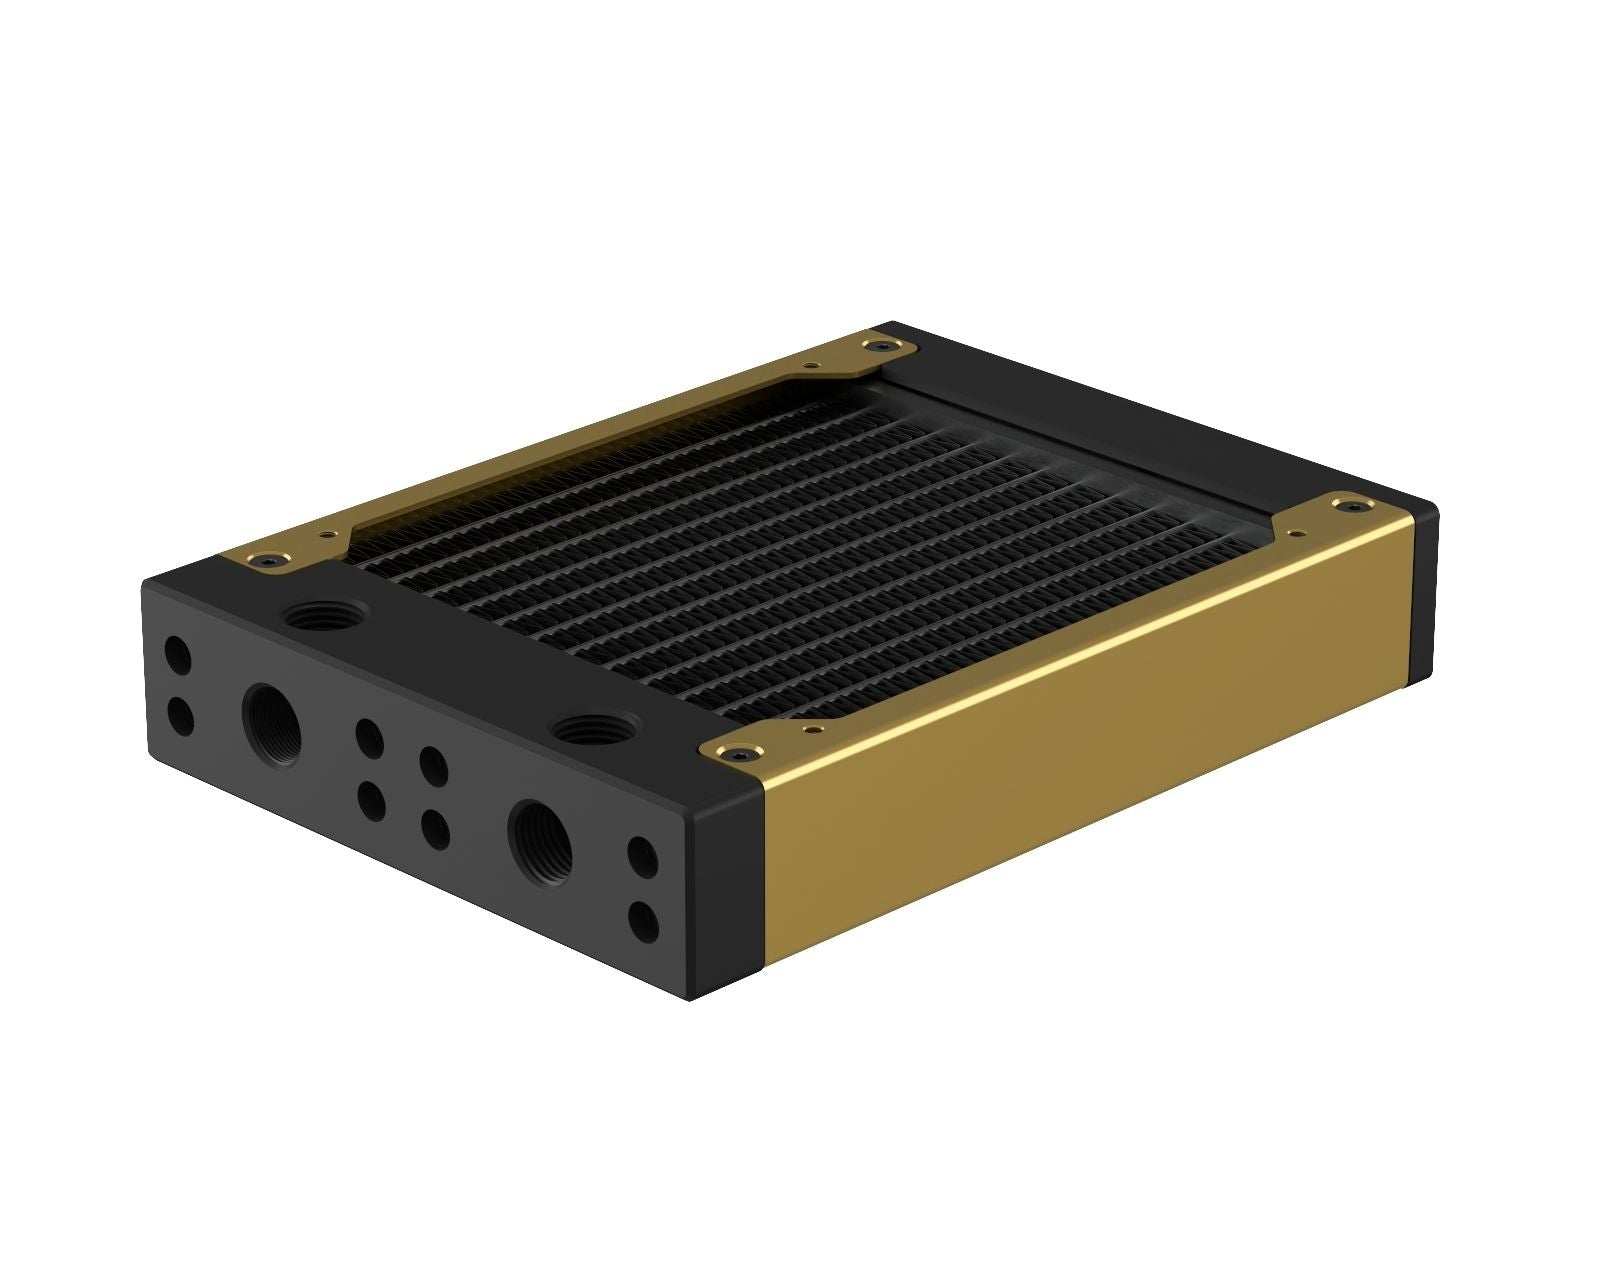 PrimoChill 120SL (30mm) EXIMO Modular Radiator, Black POM, 1x120mm, Single Fan (R-SL-BK12) Available in 20+ Colors, Assembled in USA and Custom Watercooling Loop Ready - Candy Gold